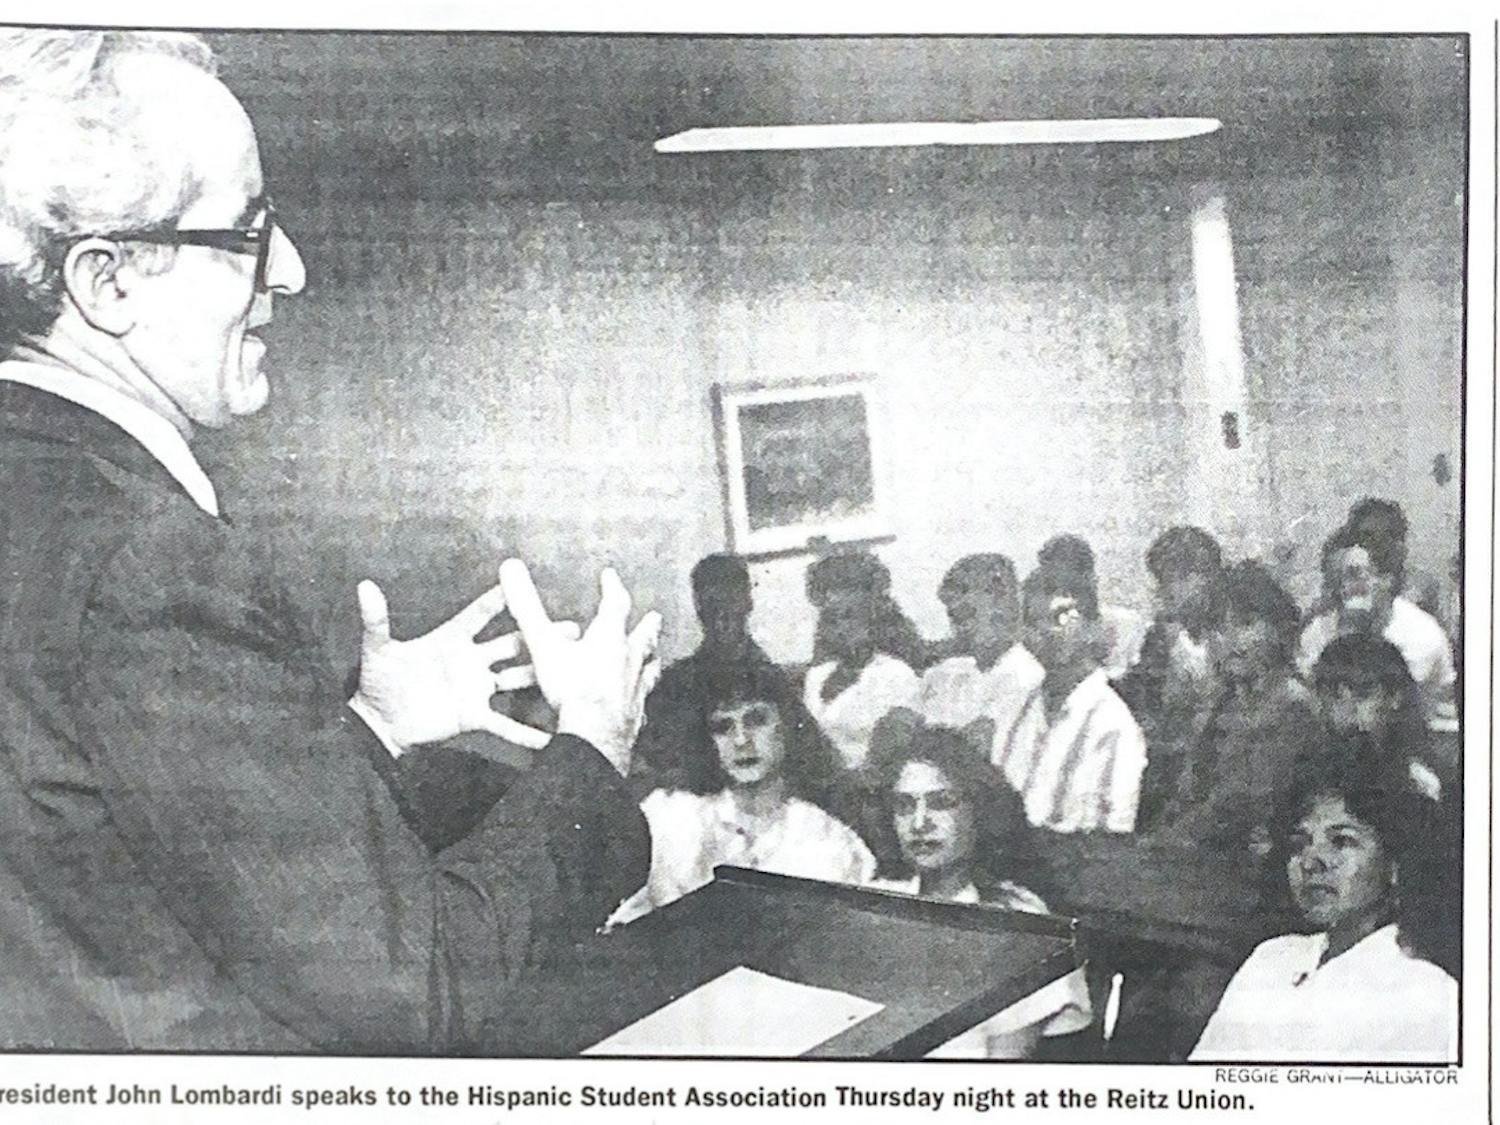 Archive photo of former UF President John Lombardi speaking to the Hispanic Student Association at the Reitz Union.